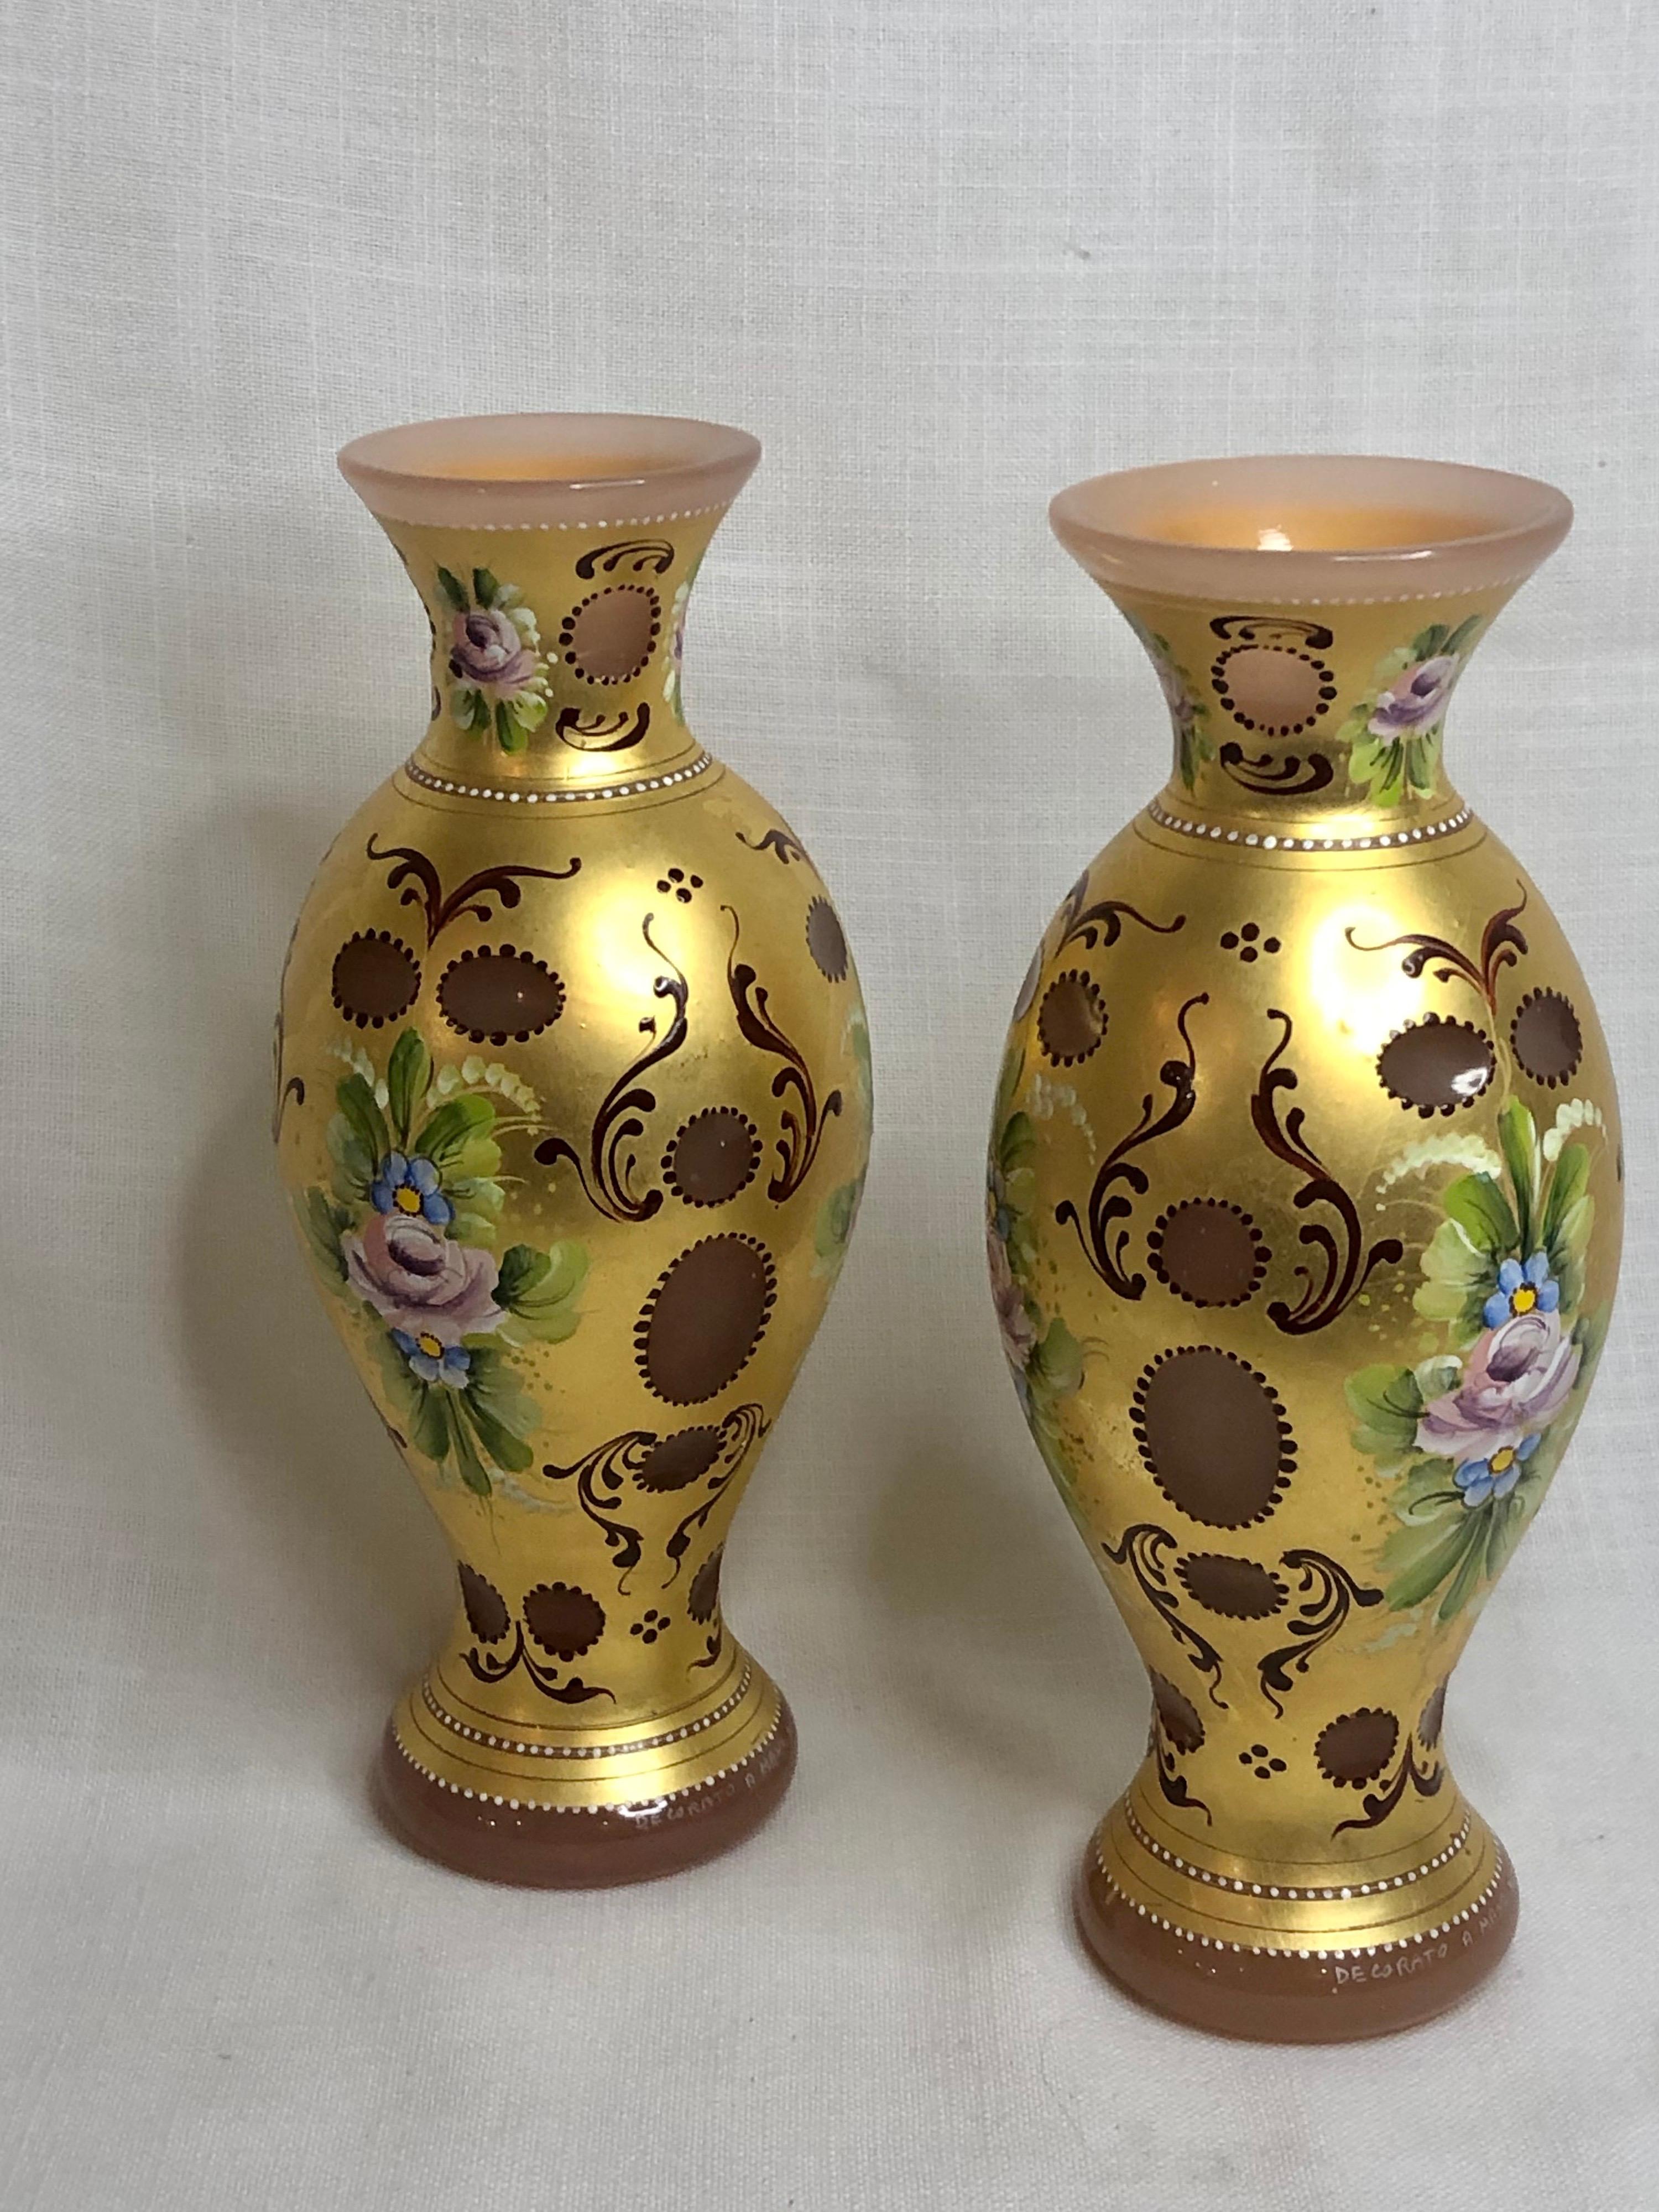 Early 20th Century Pair of Murano Vases Cut Overlay Decorated with 24 Karat Gold and Pink Roses For Sale